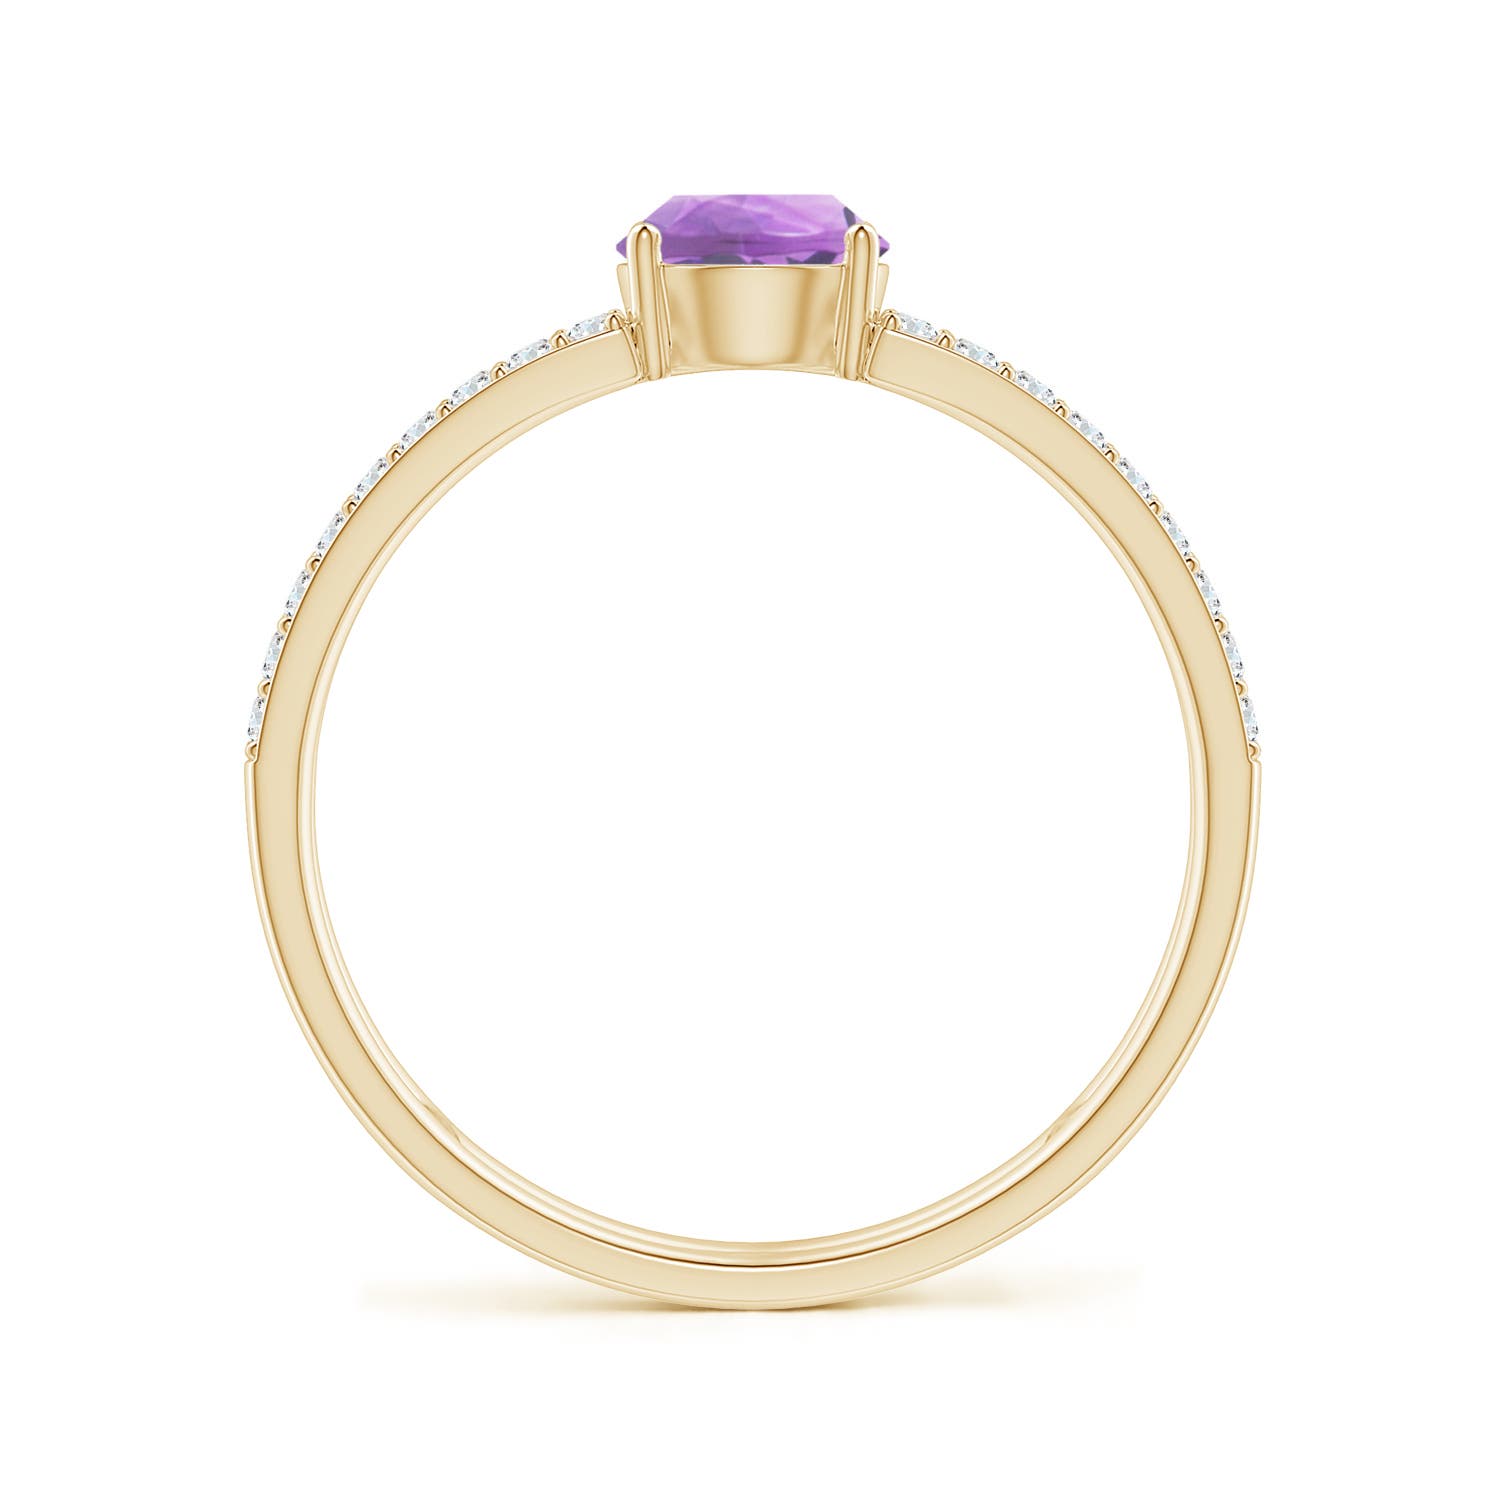 A - Amethyst / 0.77 CT / 14 KT Yellow Gold